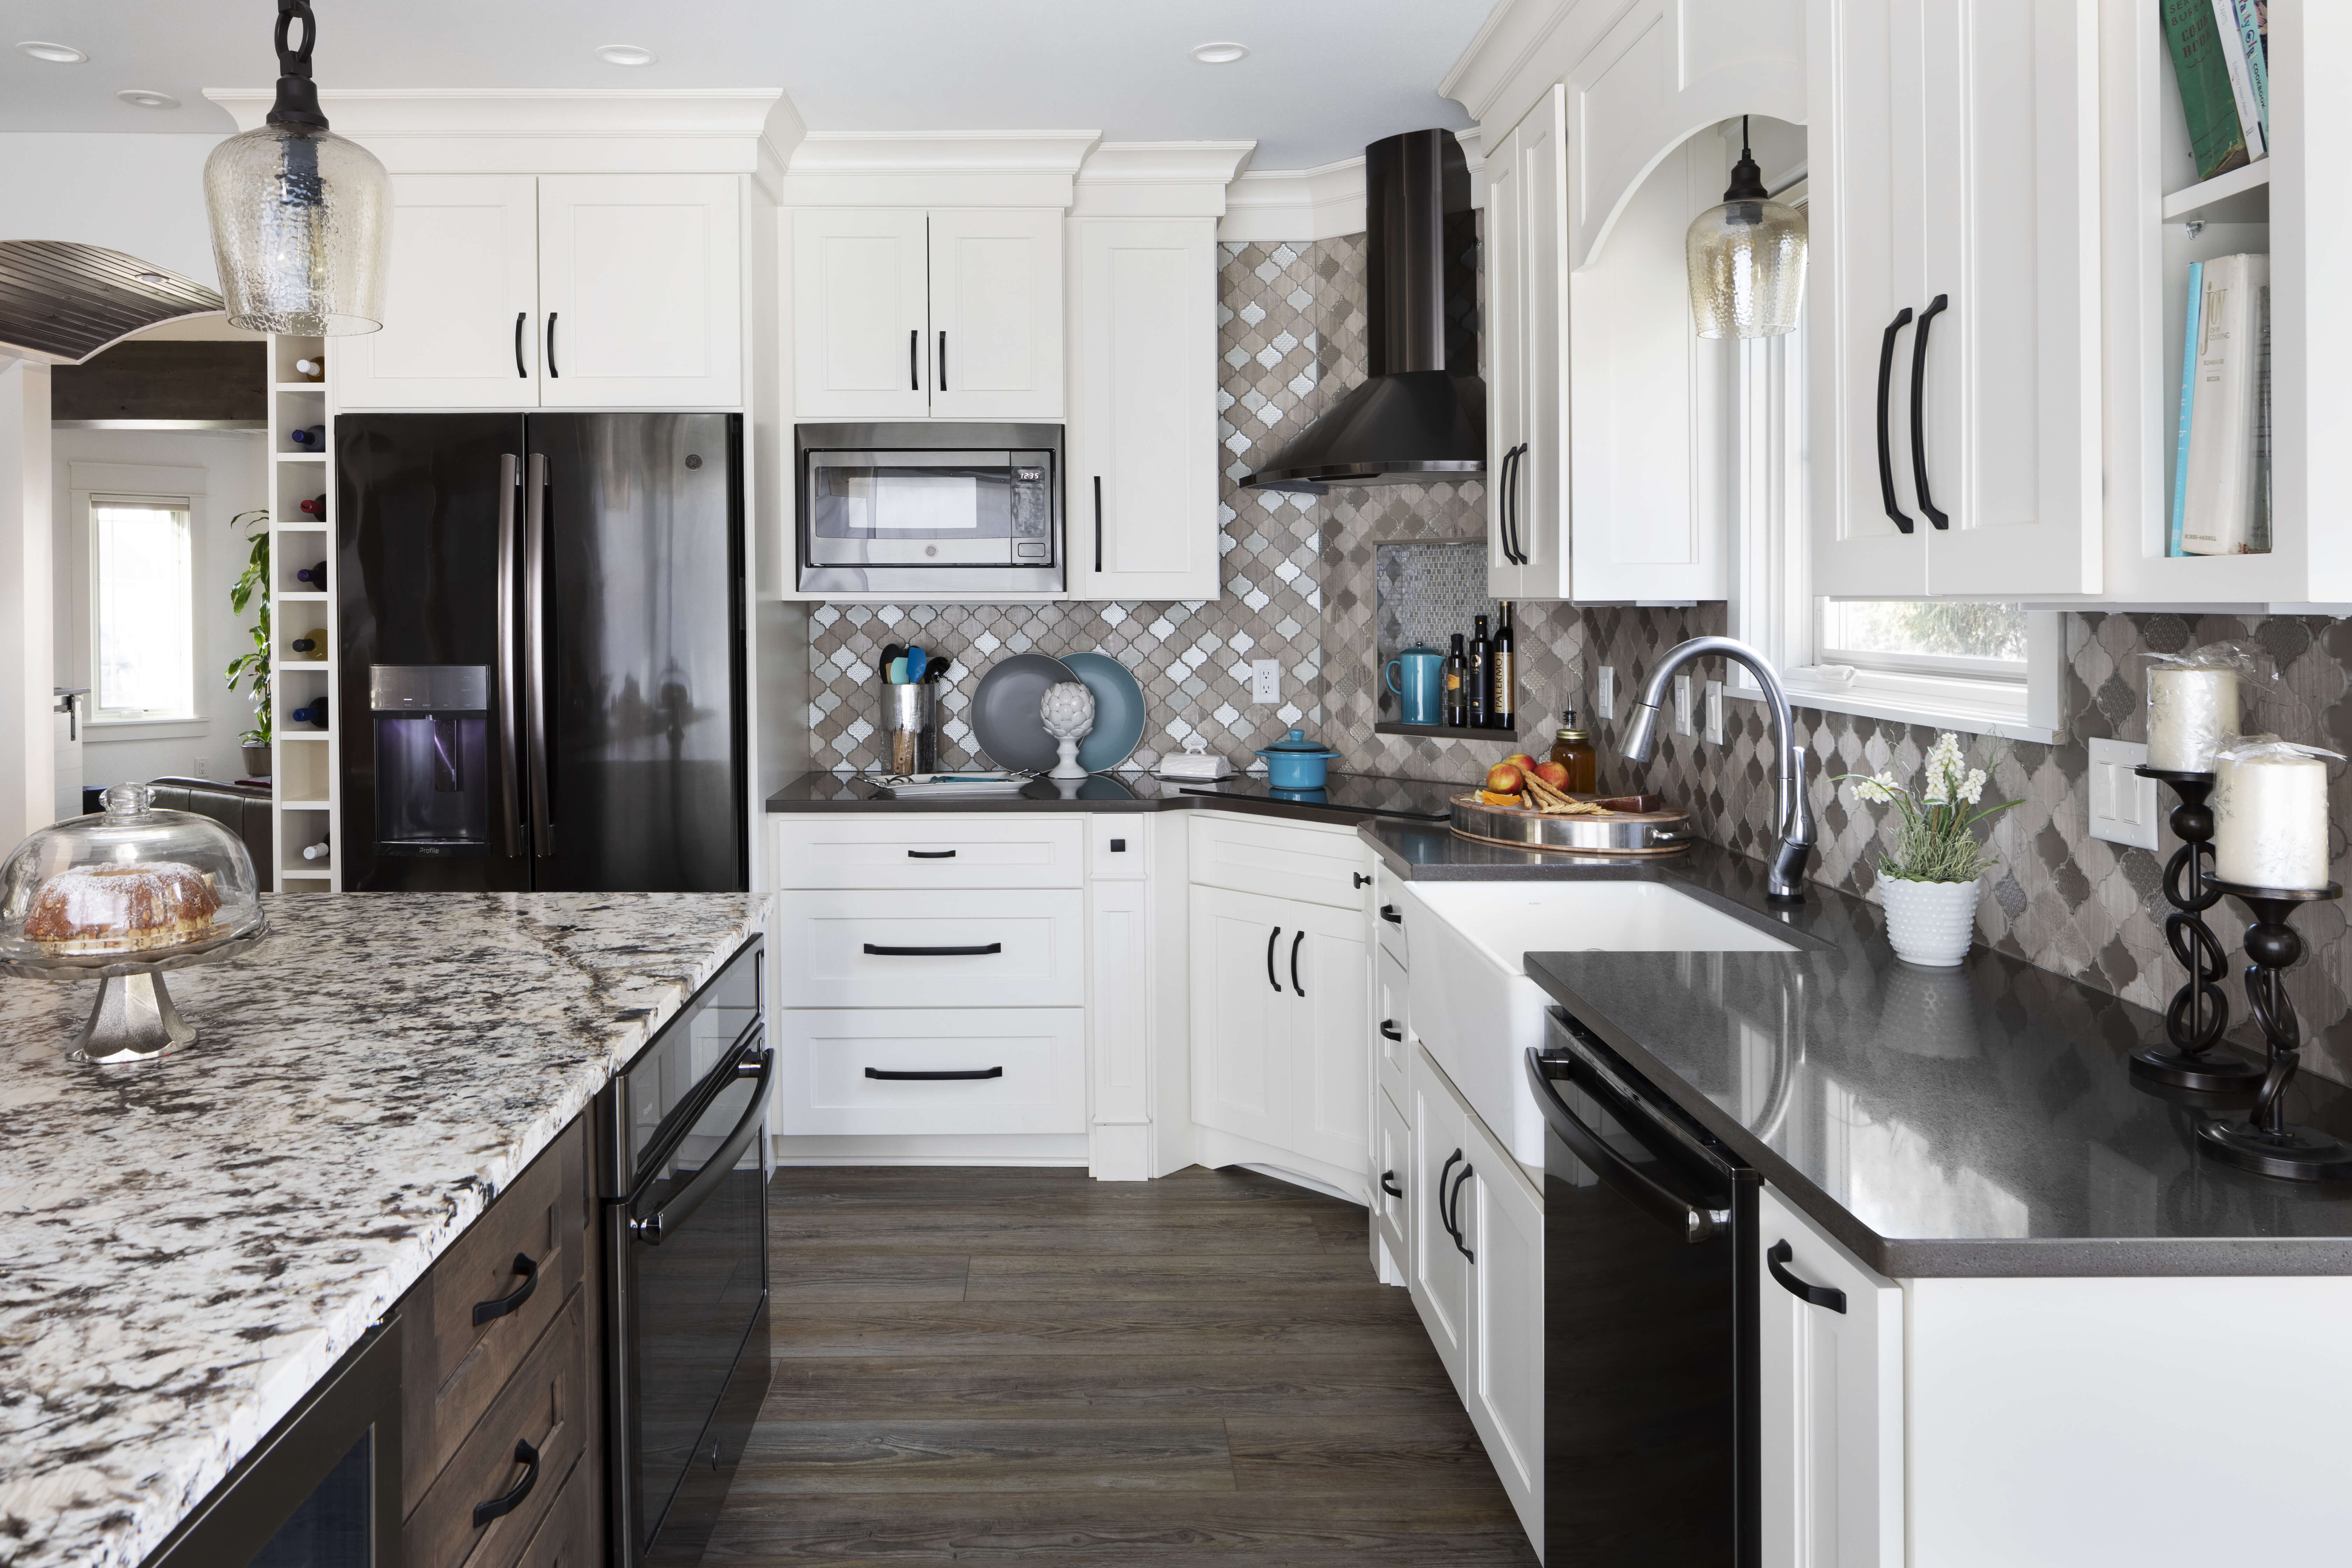 Home Trend: Black Stainless Steel Appliances  Simple kitchen remodel,  Black appliances kitchen, Black stainless appliances